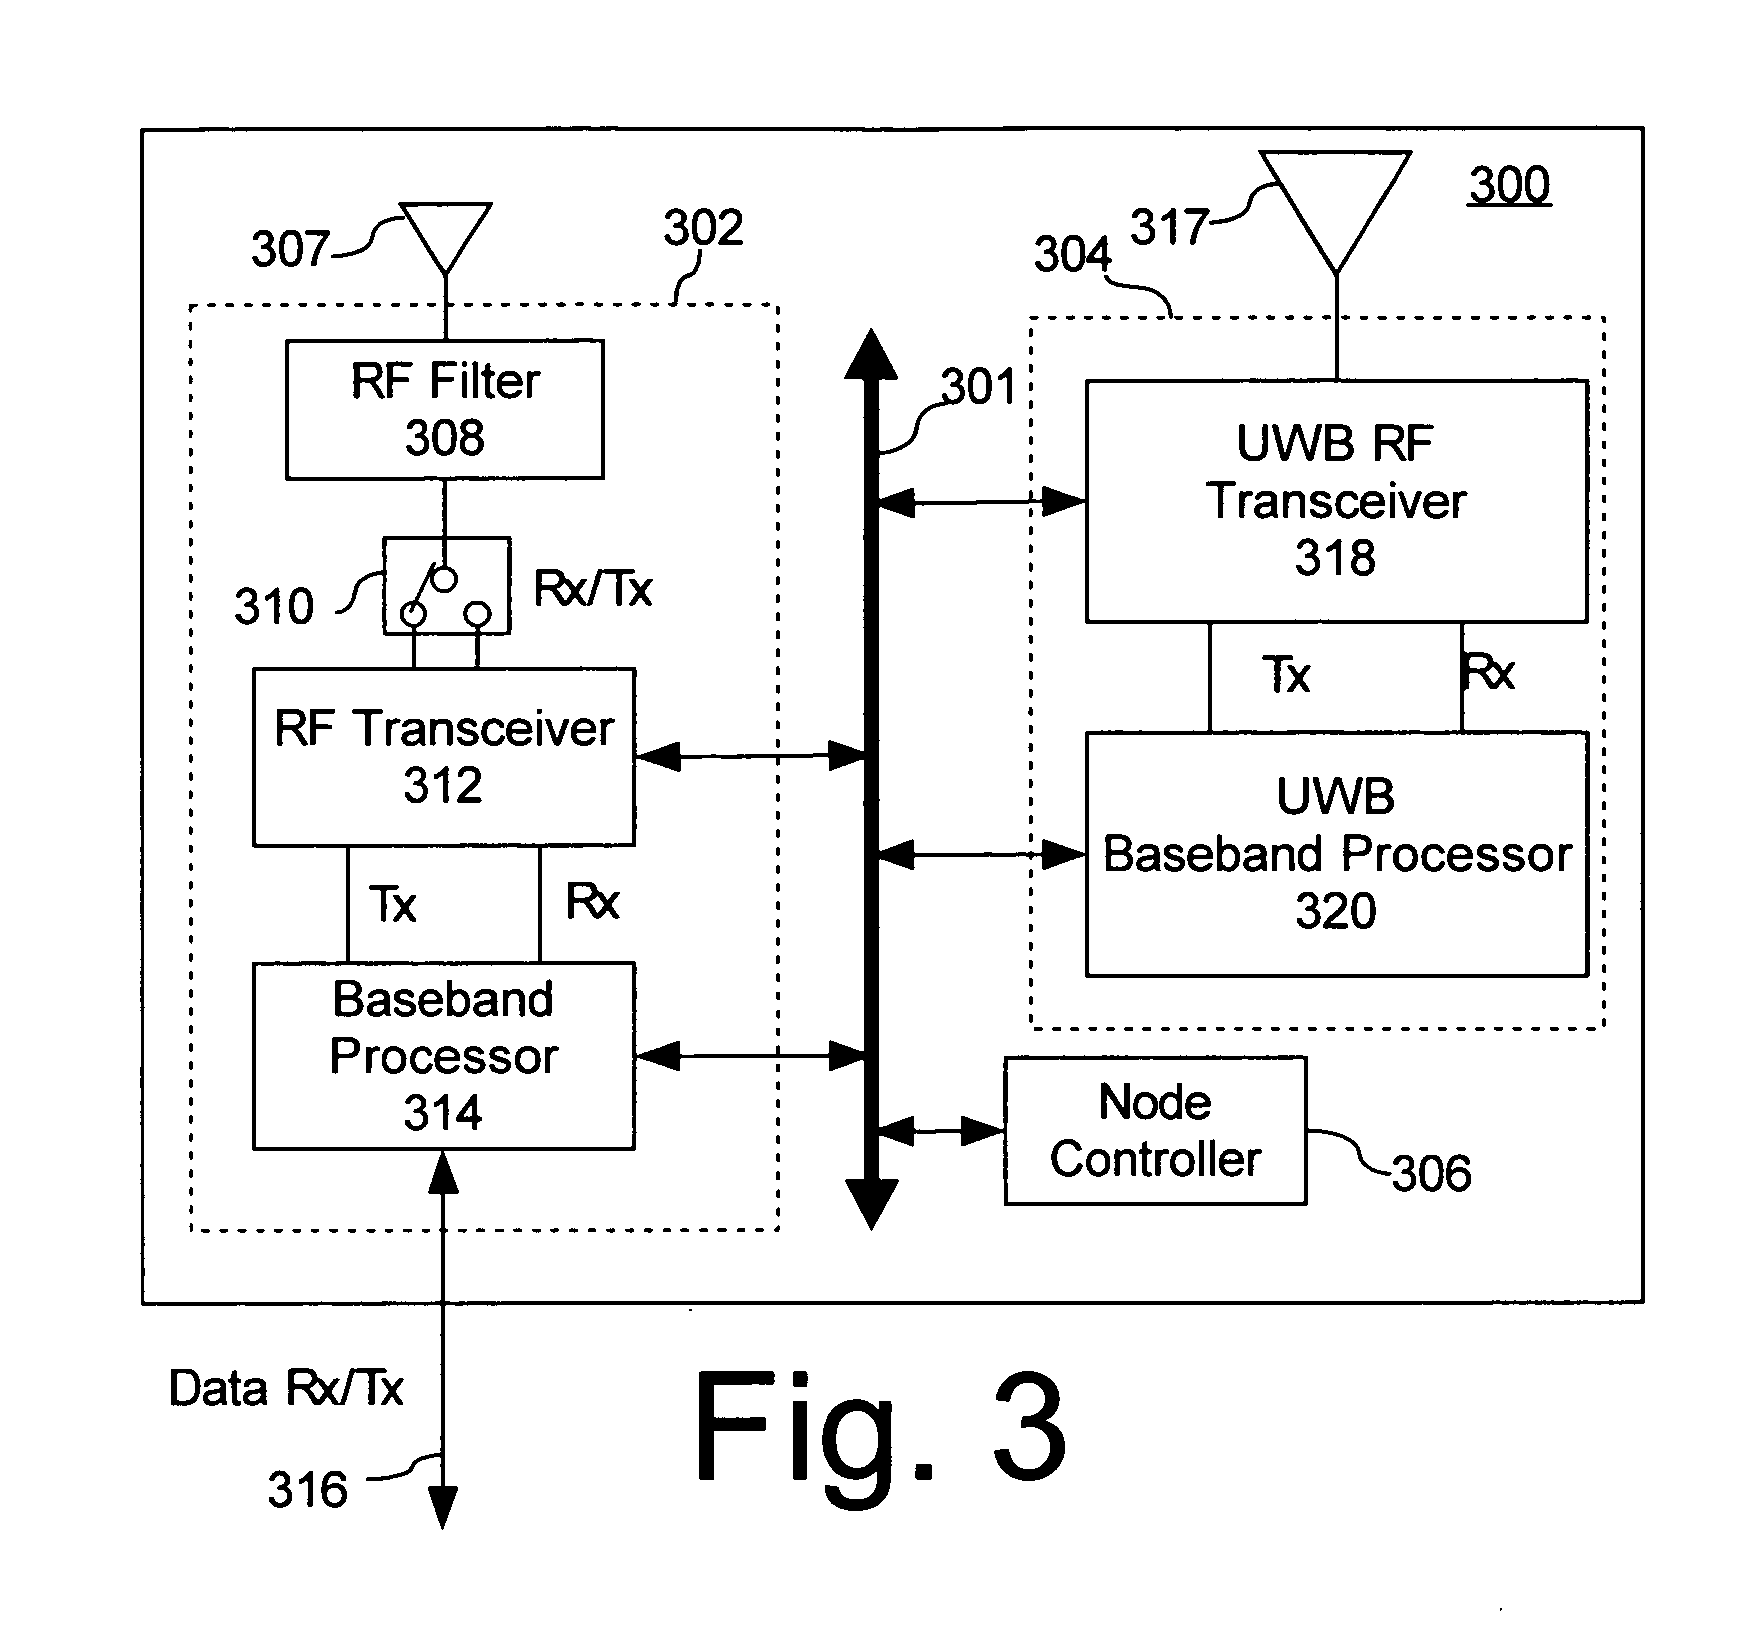 Hybrid RF network with high precision ranging